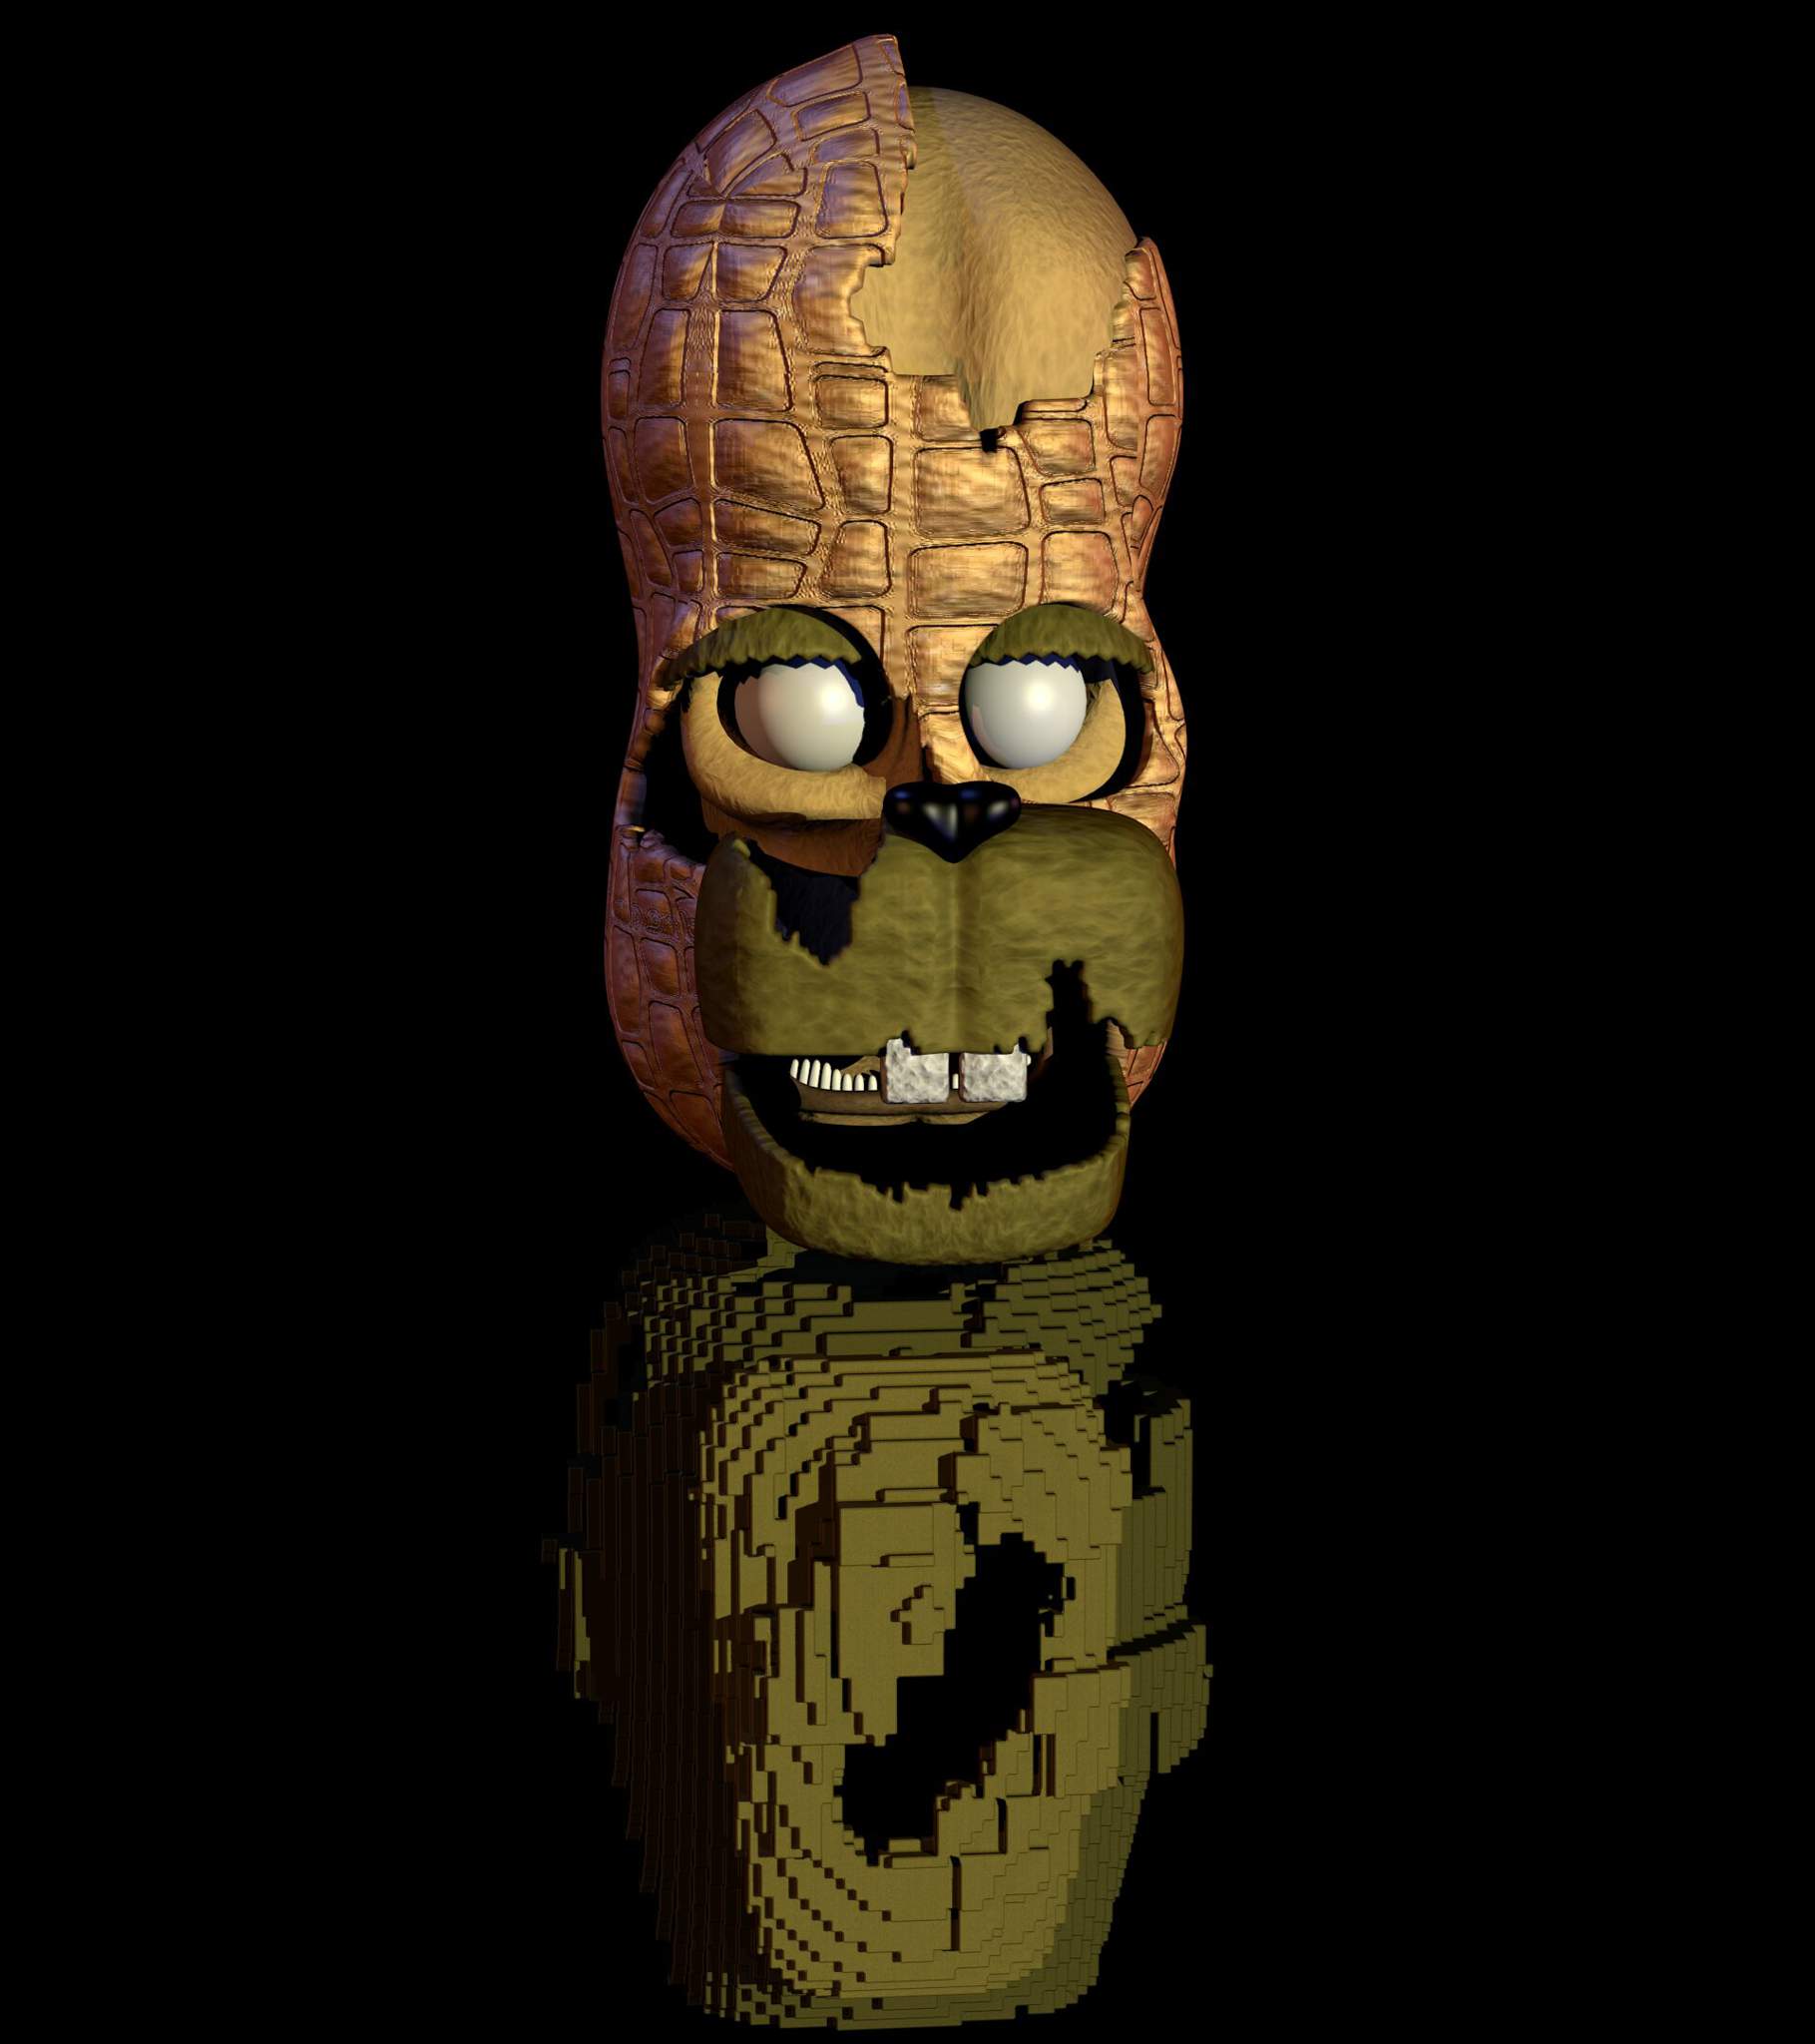 "Scraptrap in a Nutshell." Credit: SpiderLucas16 on the F...